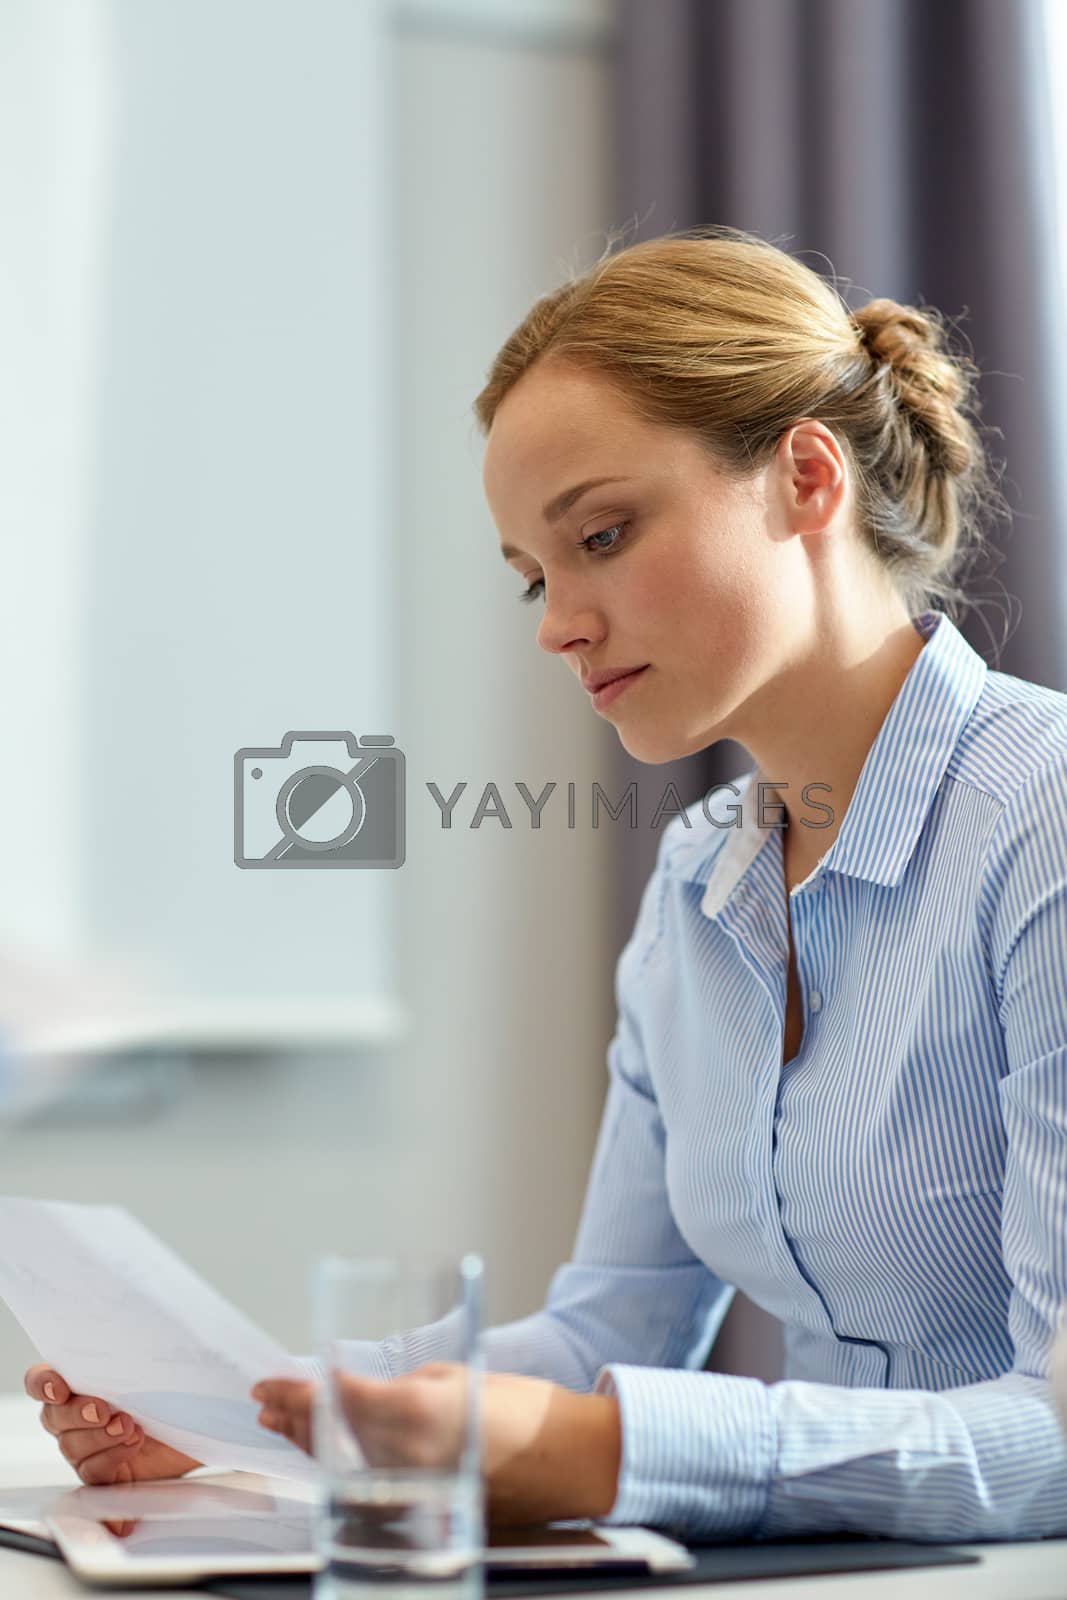 Royalty free image of businesswoman having problem in office by dolgachov